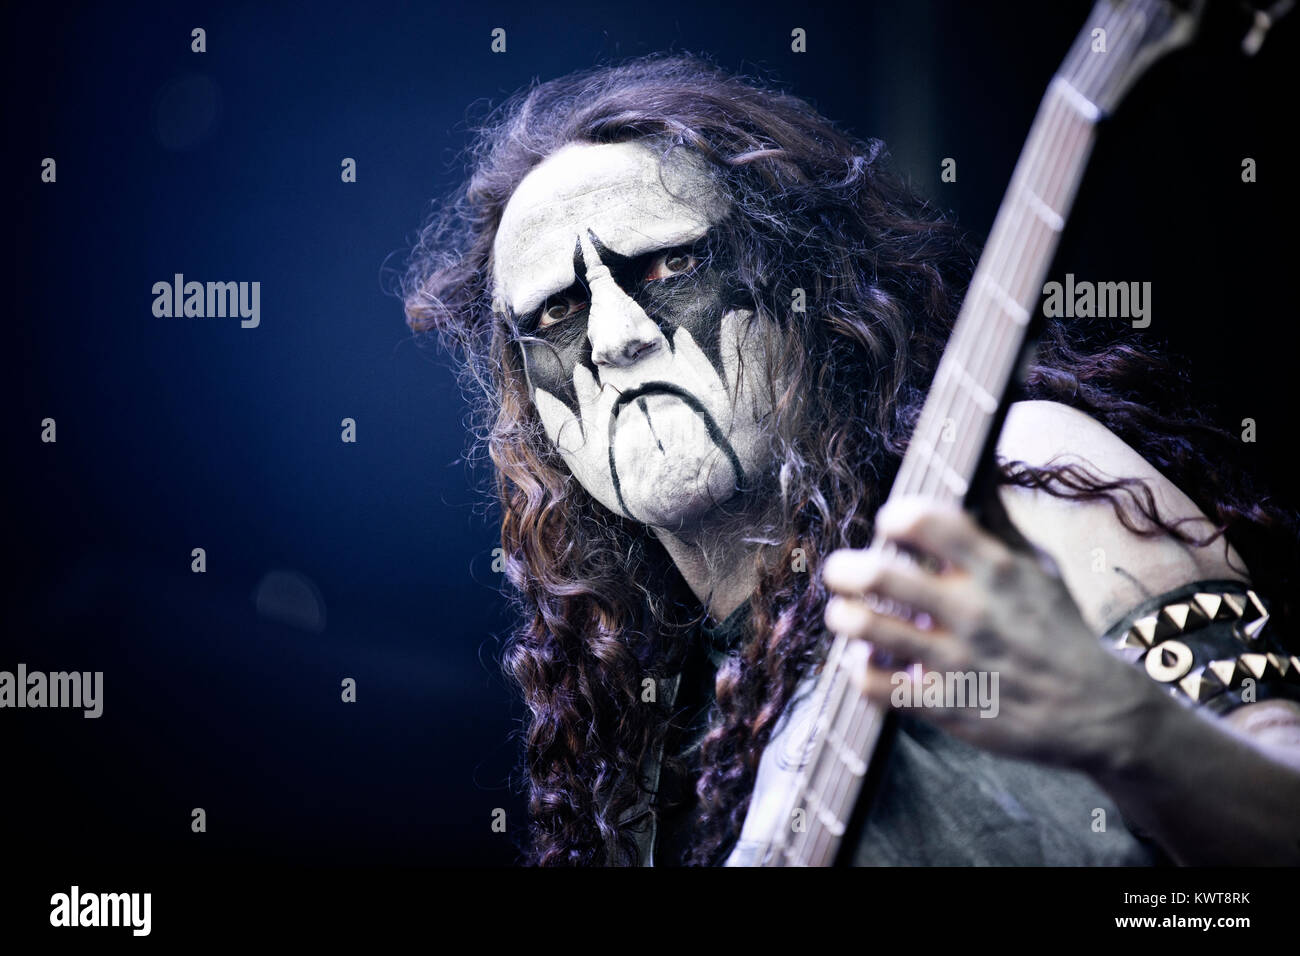 The Norwegian black metal band Immortal performs a live concert at Denmark's yearly open air heavy metal festival Copenhell 2012 in Copenhagen. Denmark 16/06 2012. Stock Photo